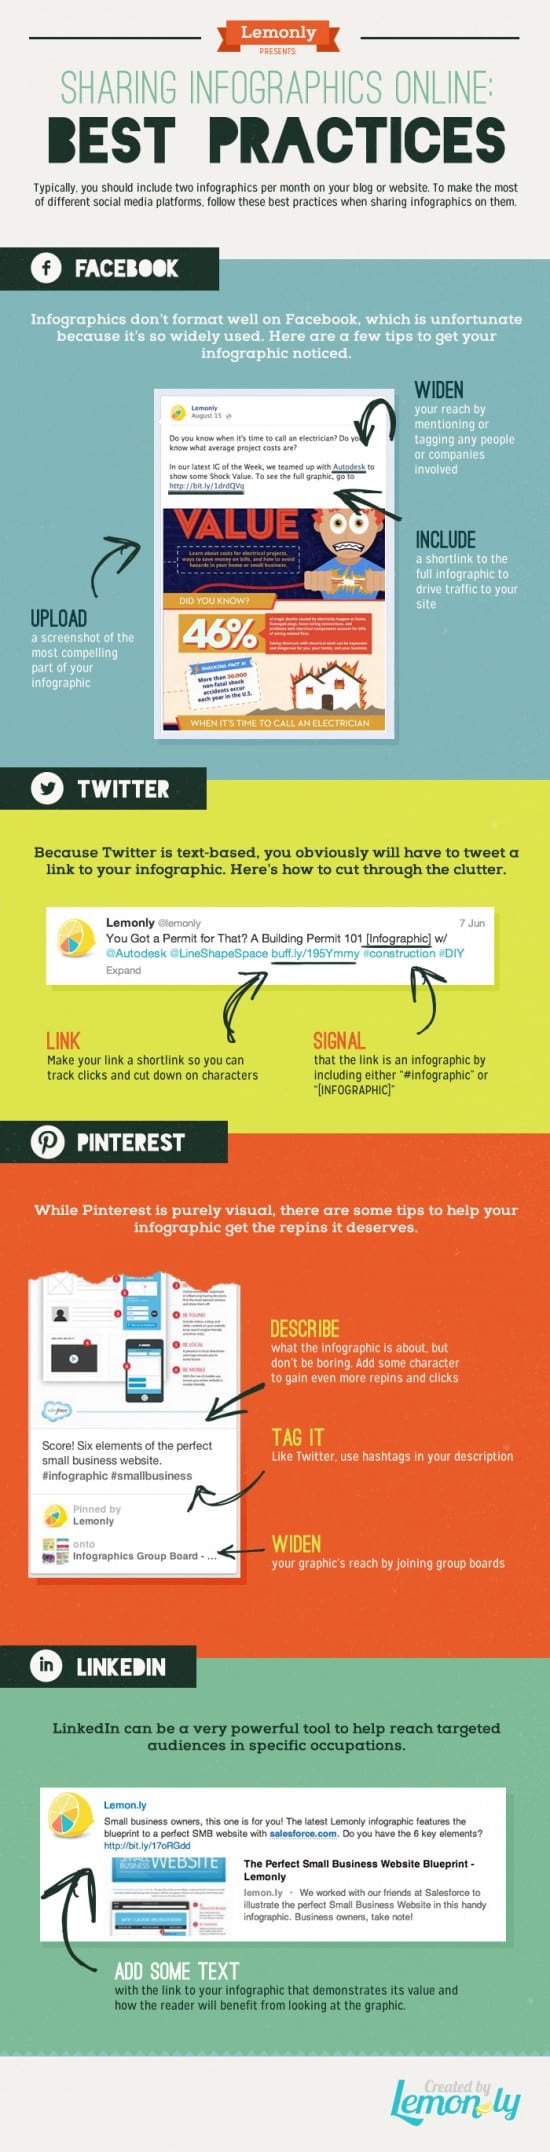 Sharing-Infographic-Online-Best-Practices-1